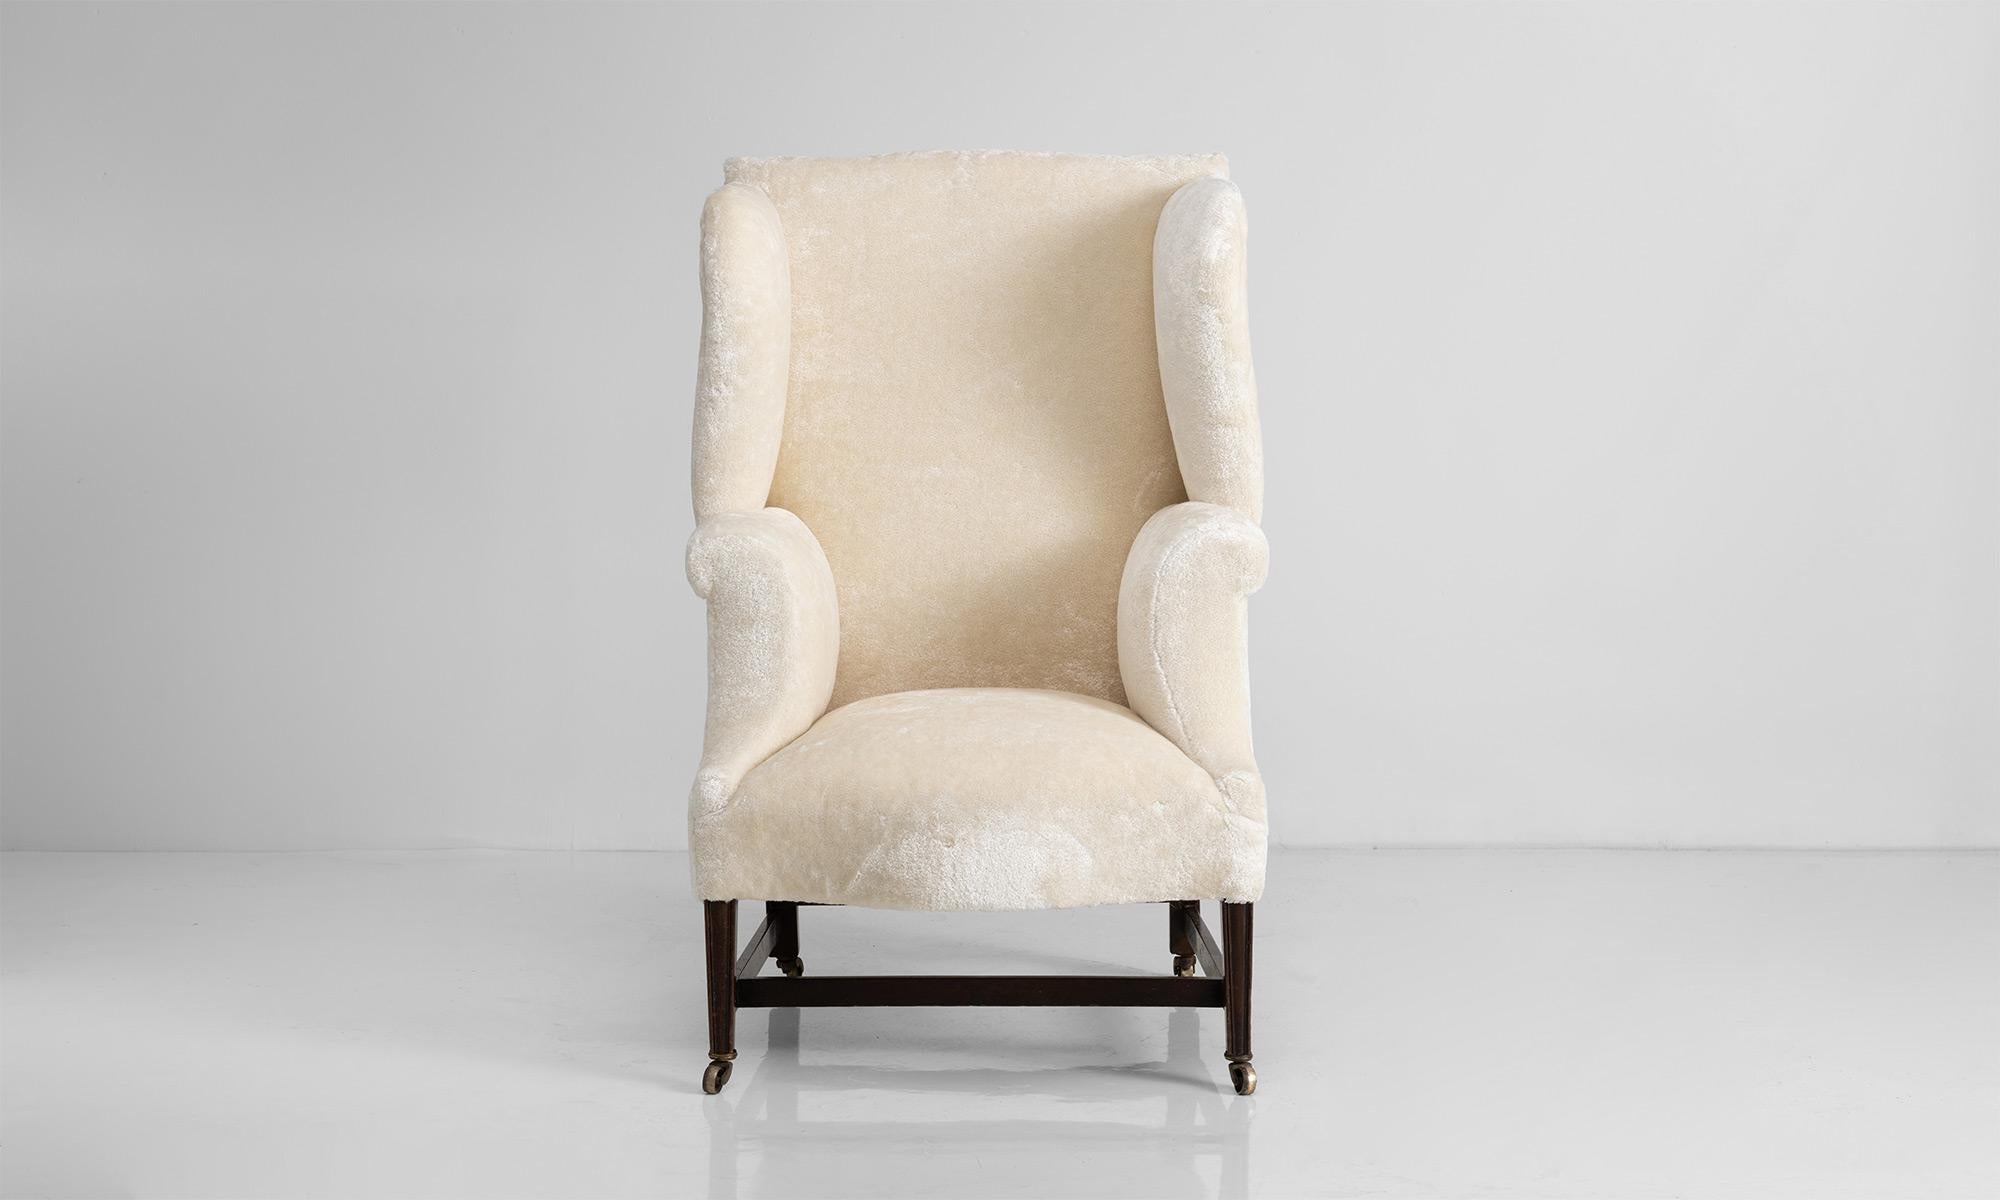 Generous wingbackaArmchair in cotton blend by Dedar Milano.

England circa 1800

Newly upholstered on antique frame.

Measures: 29” W x 26” D x 45” H x 16” seat.